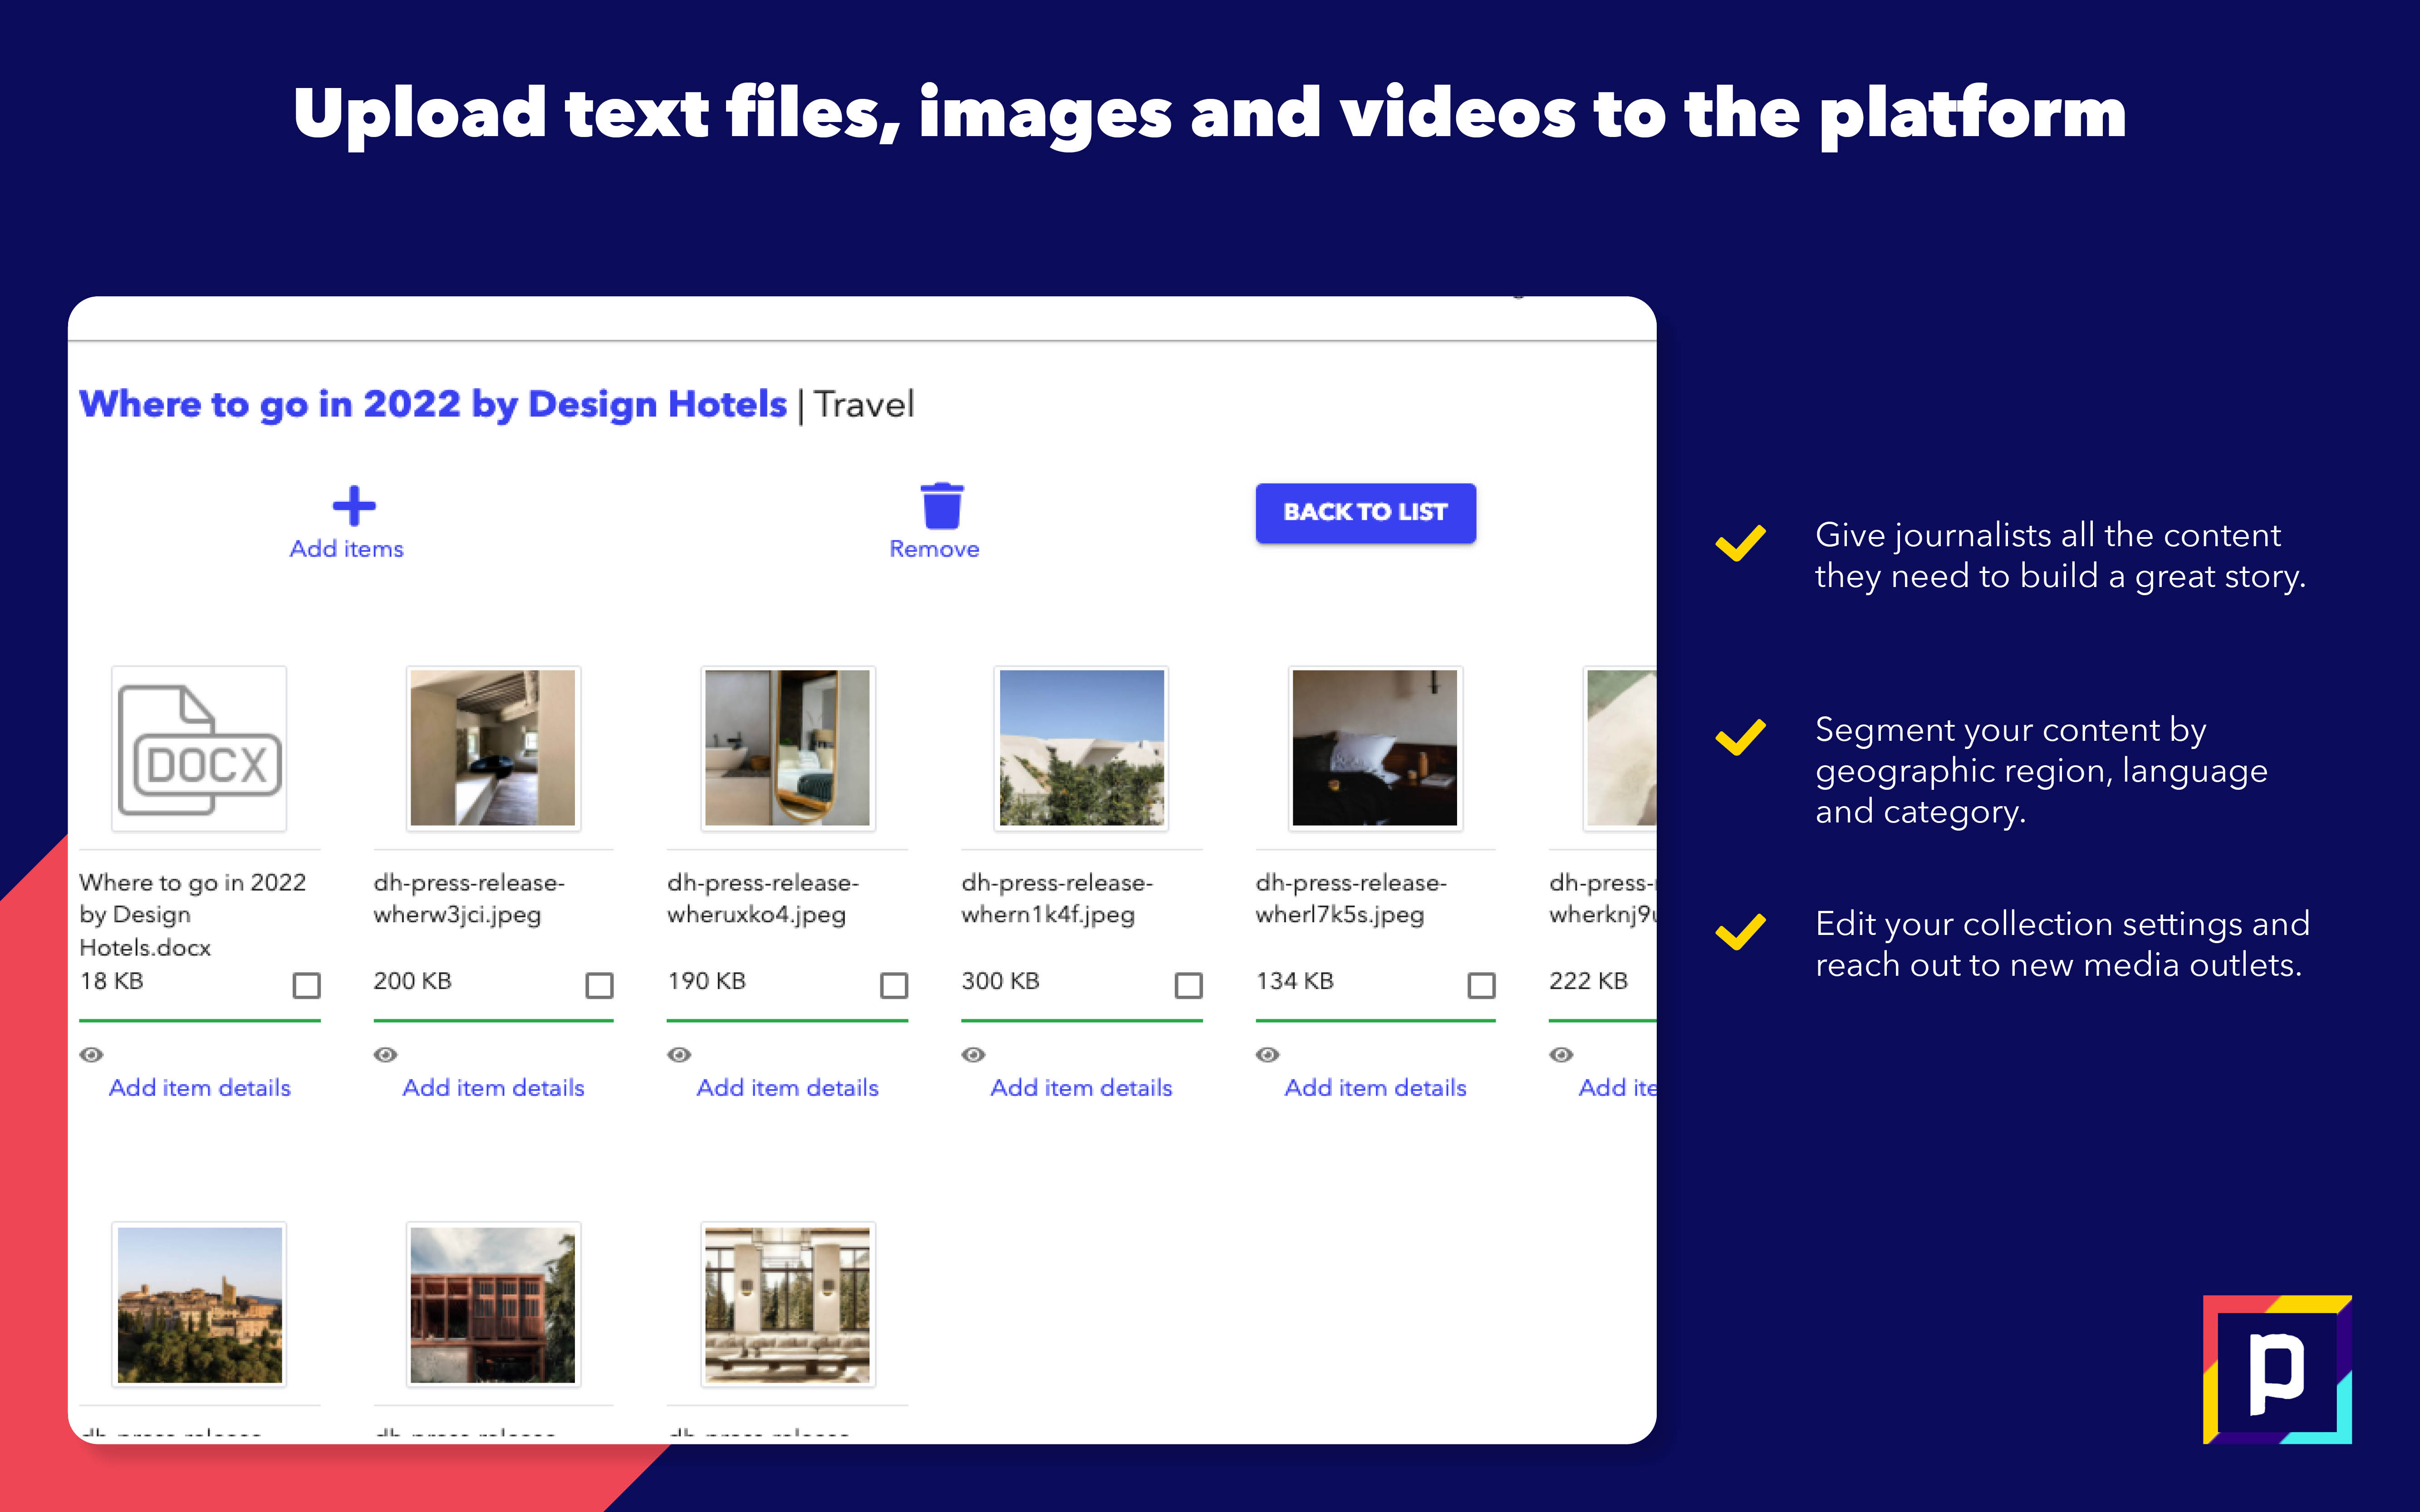 Upload text files, images and videos to the platform